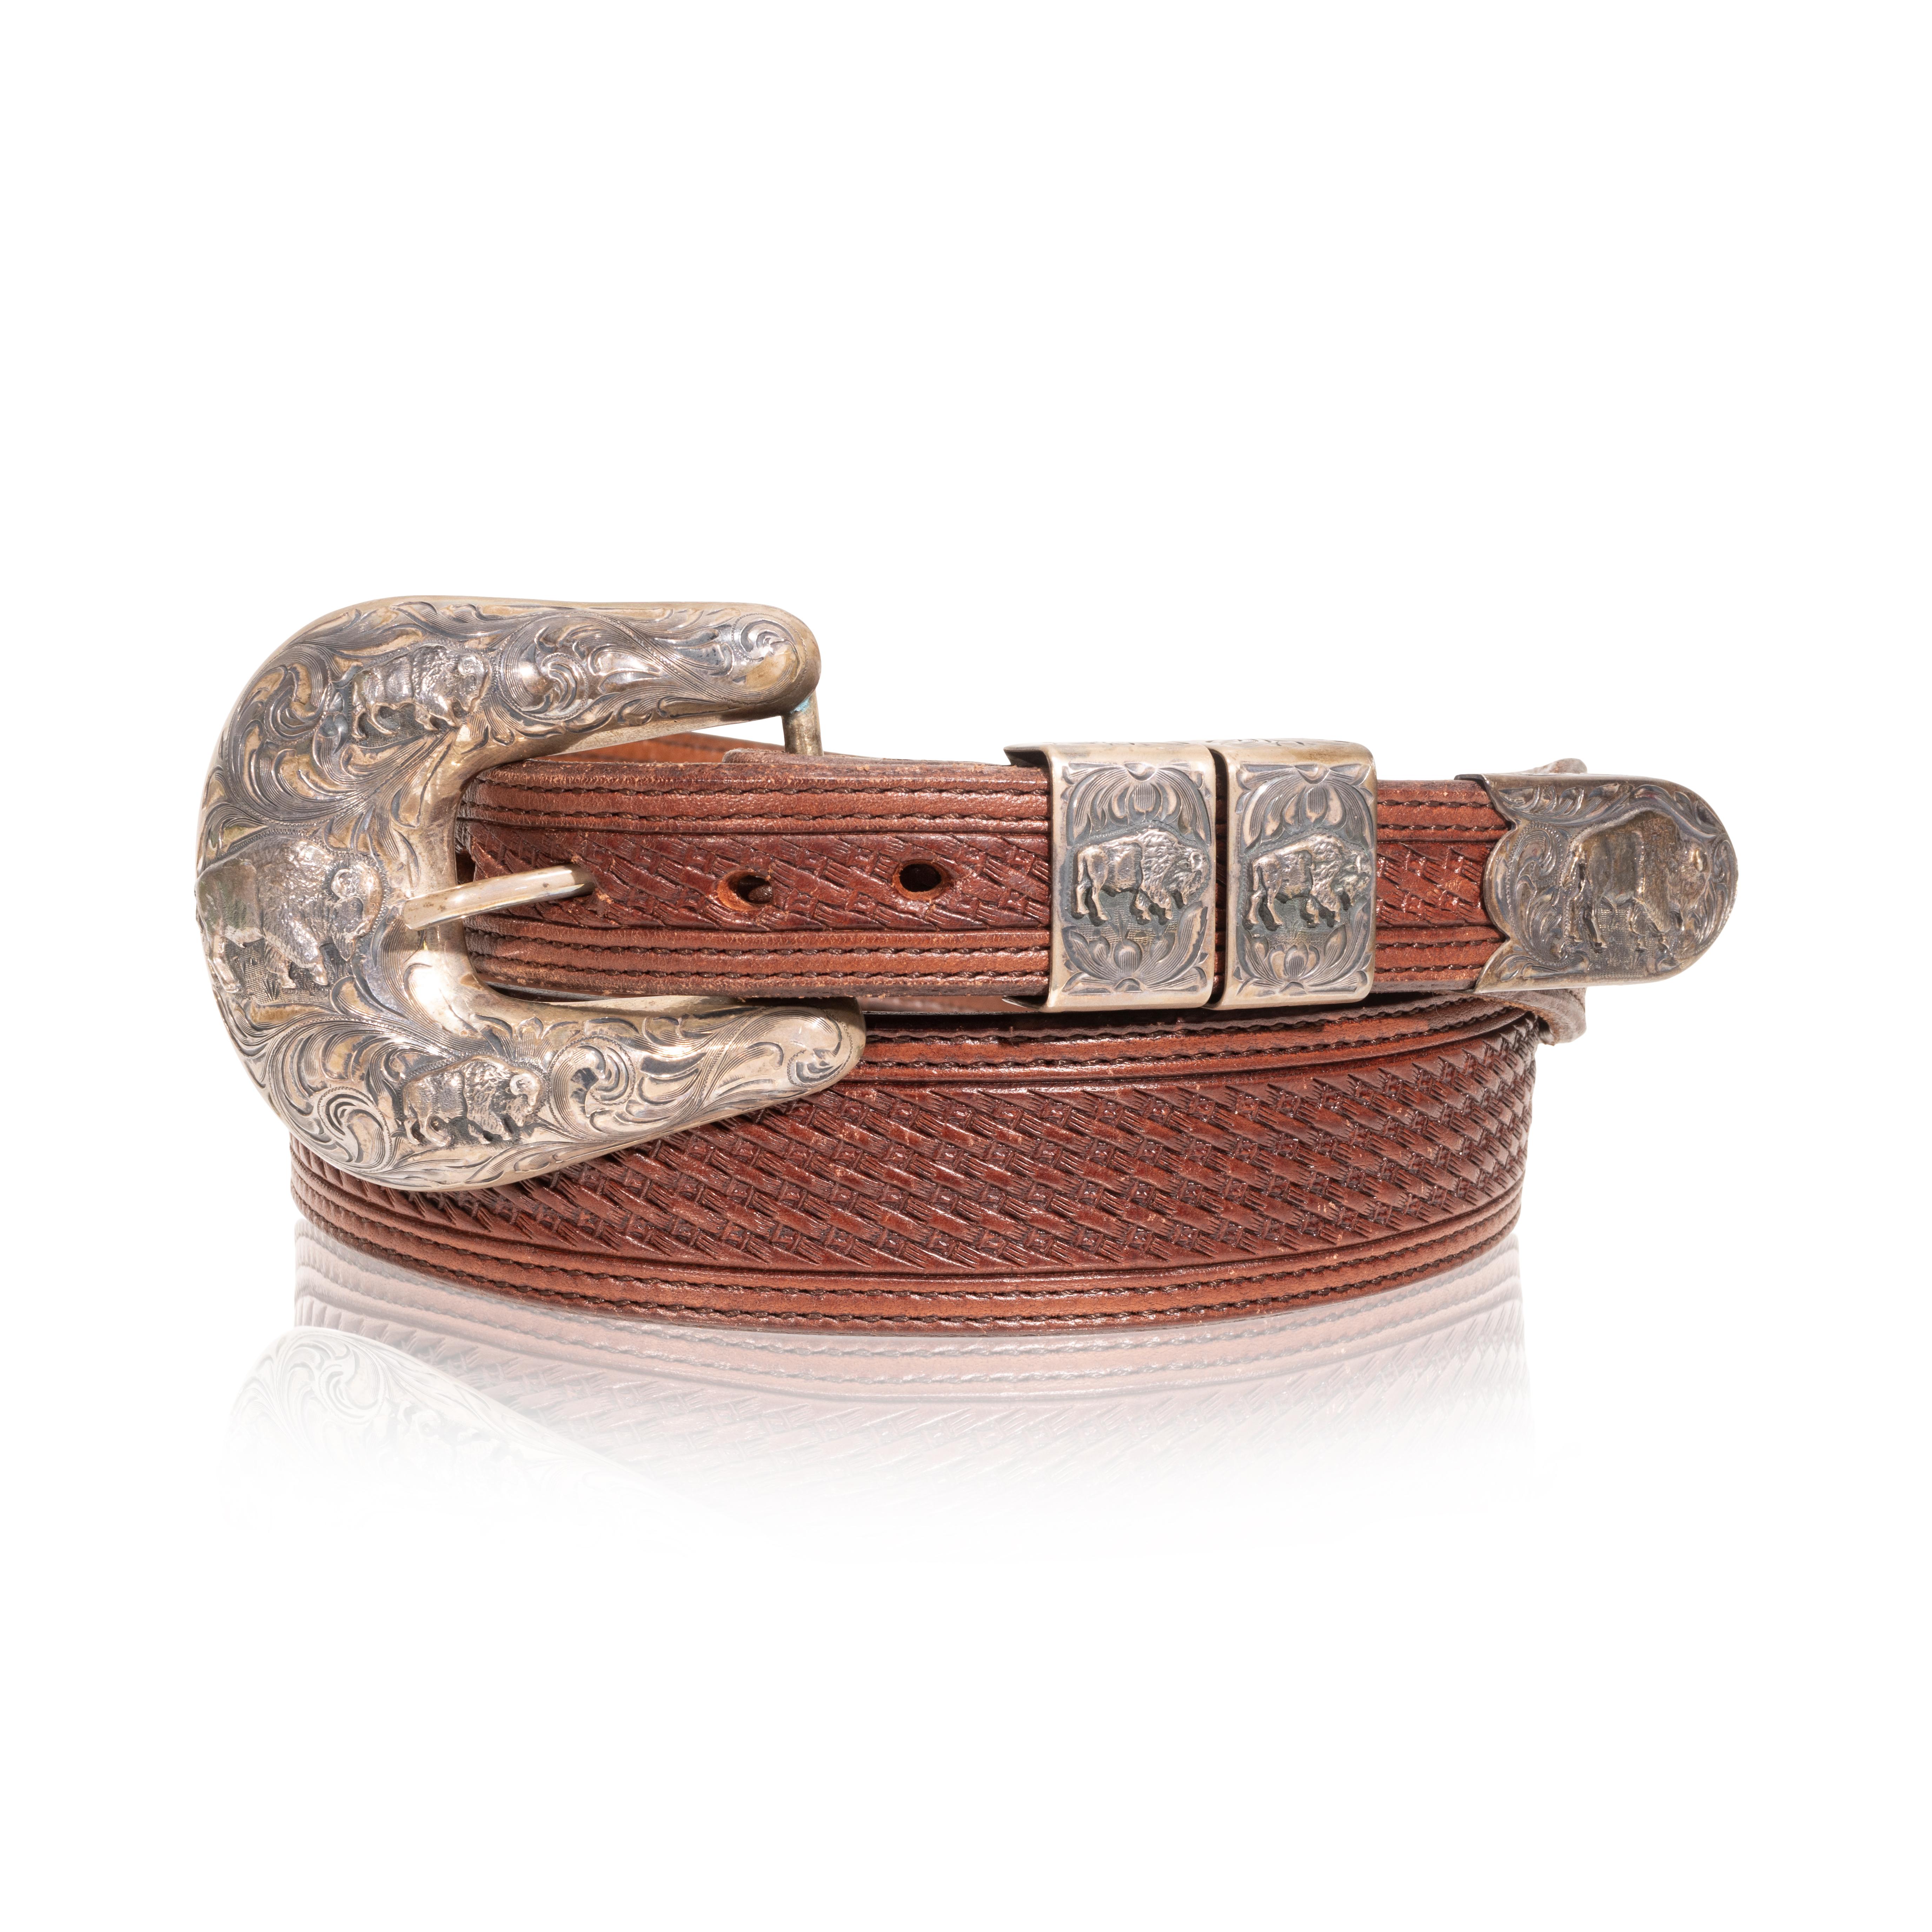 Vogt sterling buckle set on chocolate basket weave leather belt. Buckle features one large bison and two smaller bison with scrolled leaf desig aurrounding. Mirrored design on loops and end piece. Stamped 